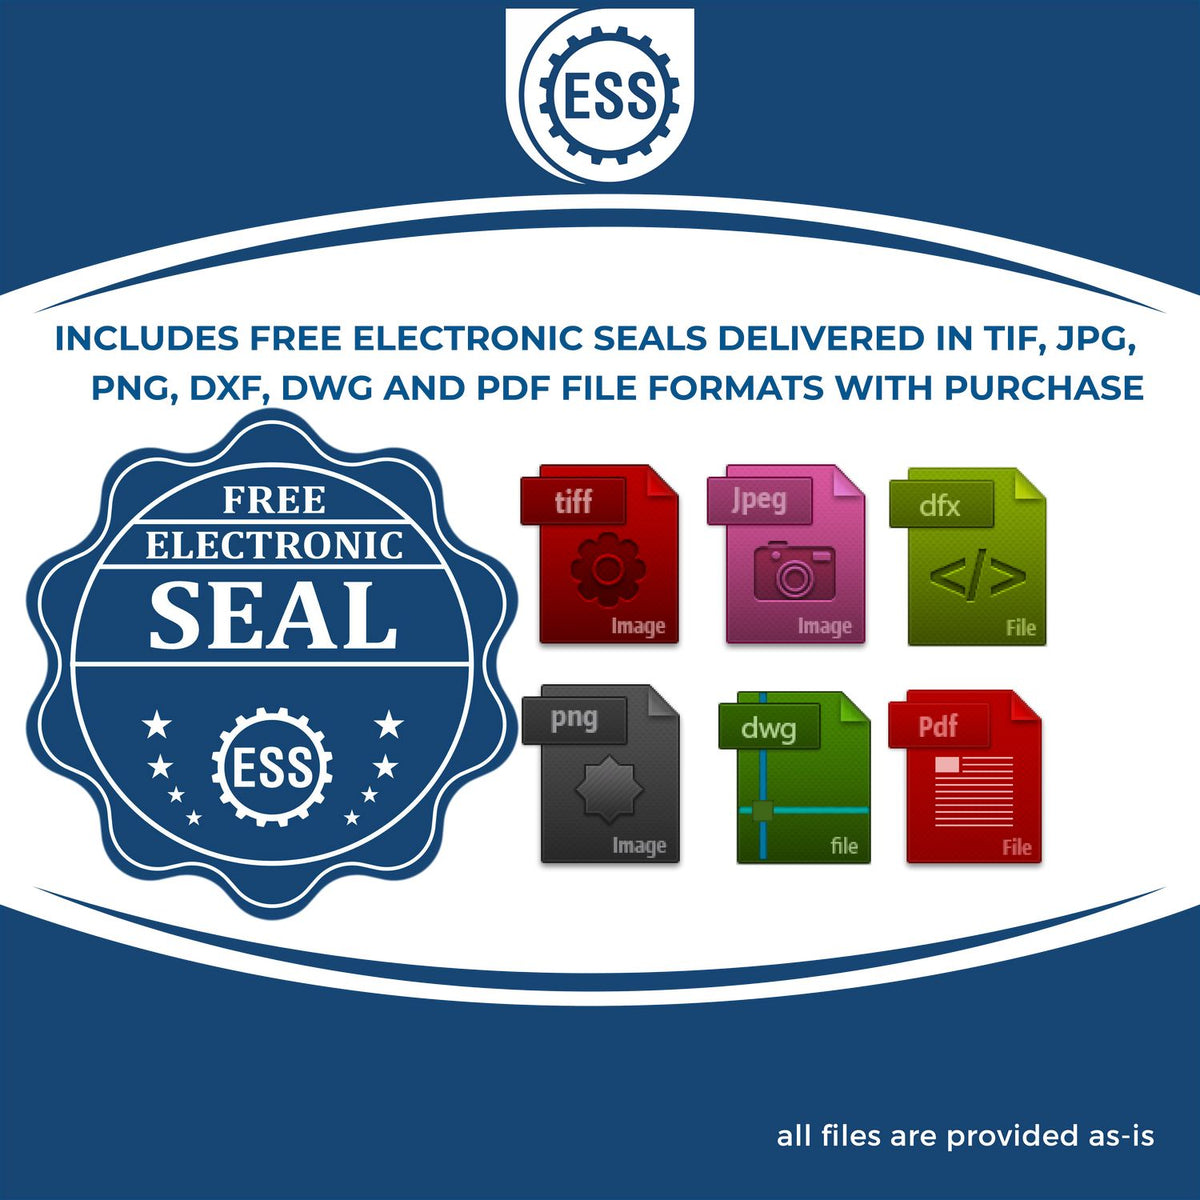 An infographic for the free electronic seal for the Premium MaxLight Pre-Inked Tennessee Engineering Stamp illustrating the different file type icons such as DXF, DWG, TIF, JPG and PNG.